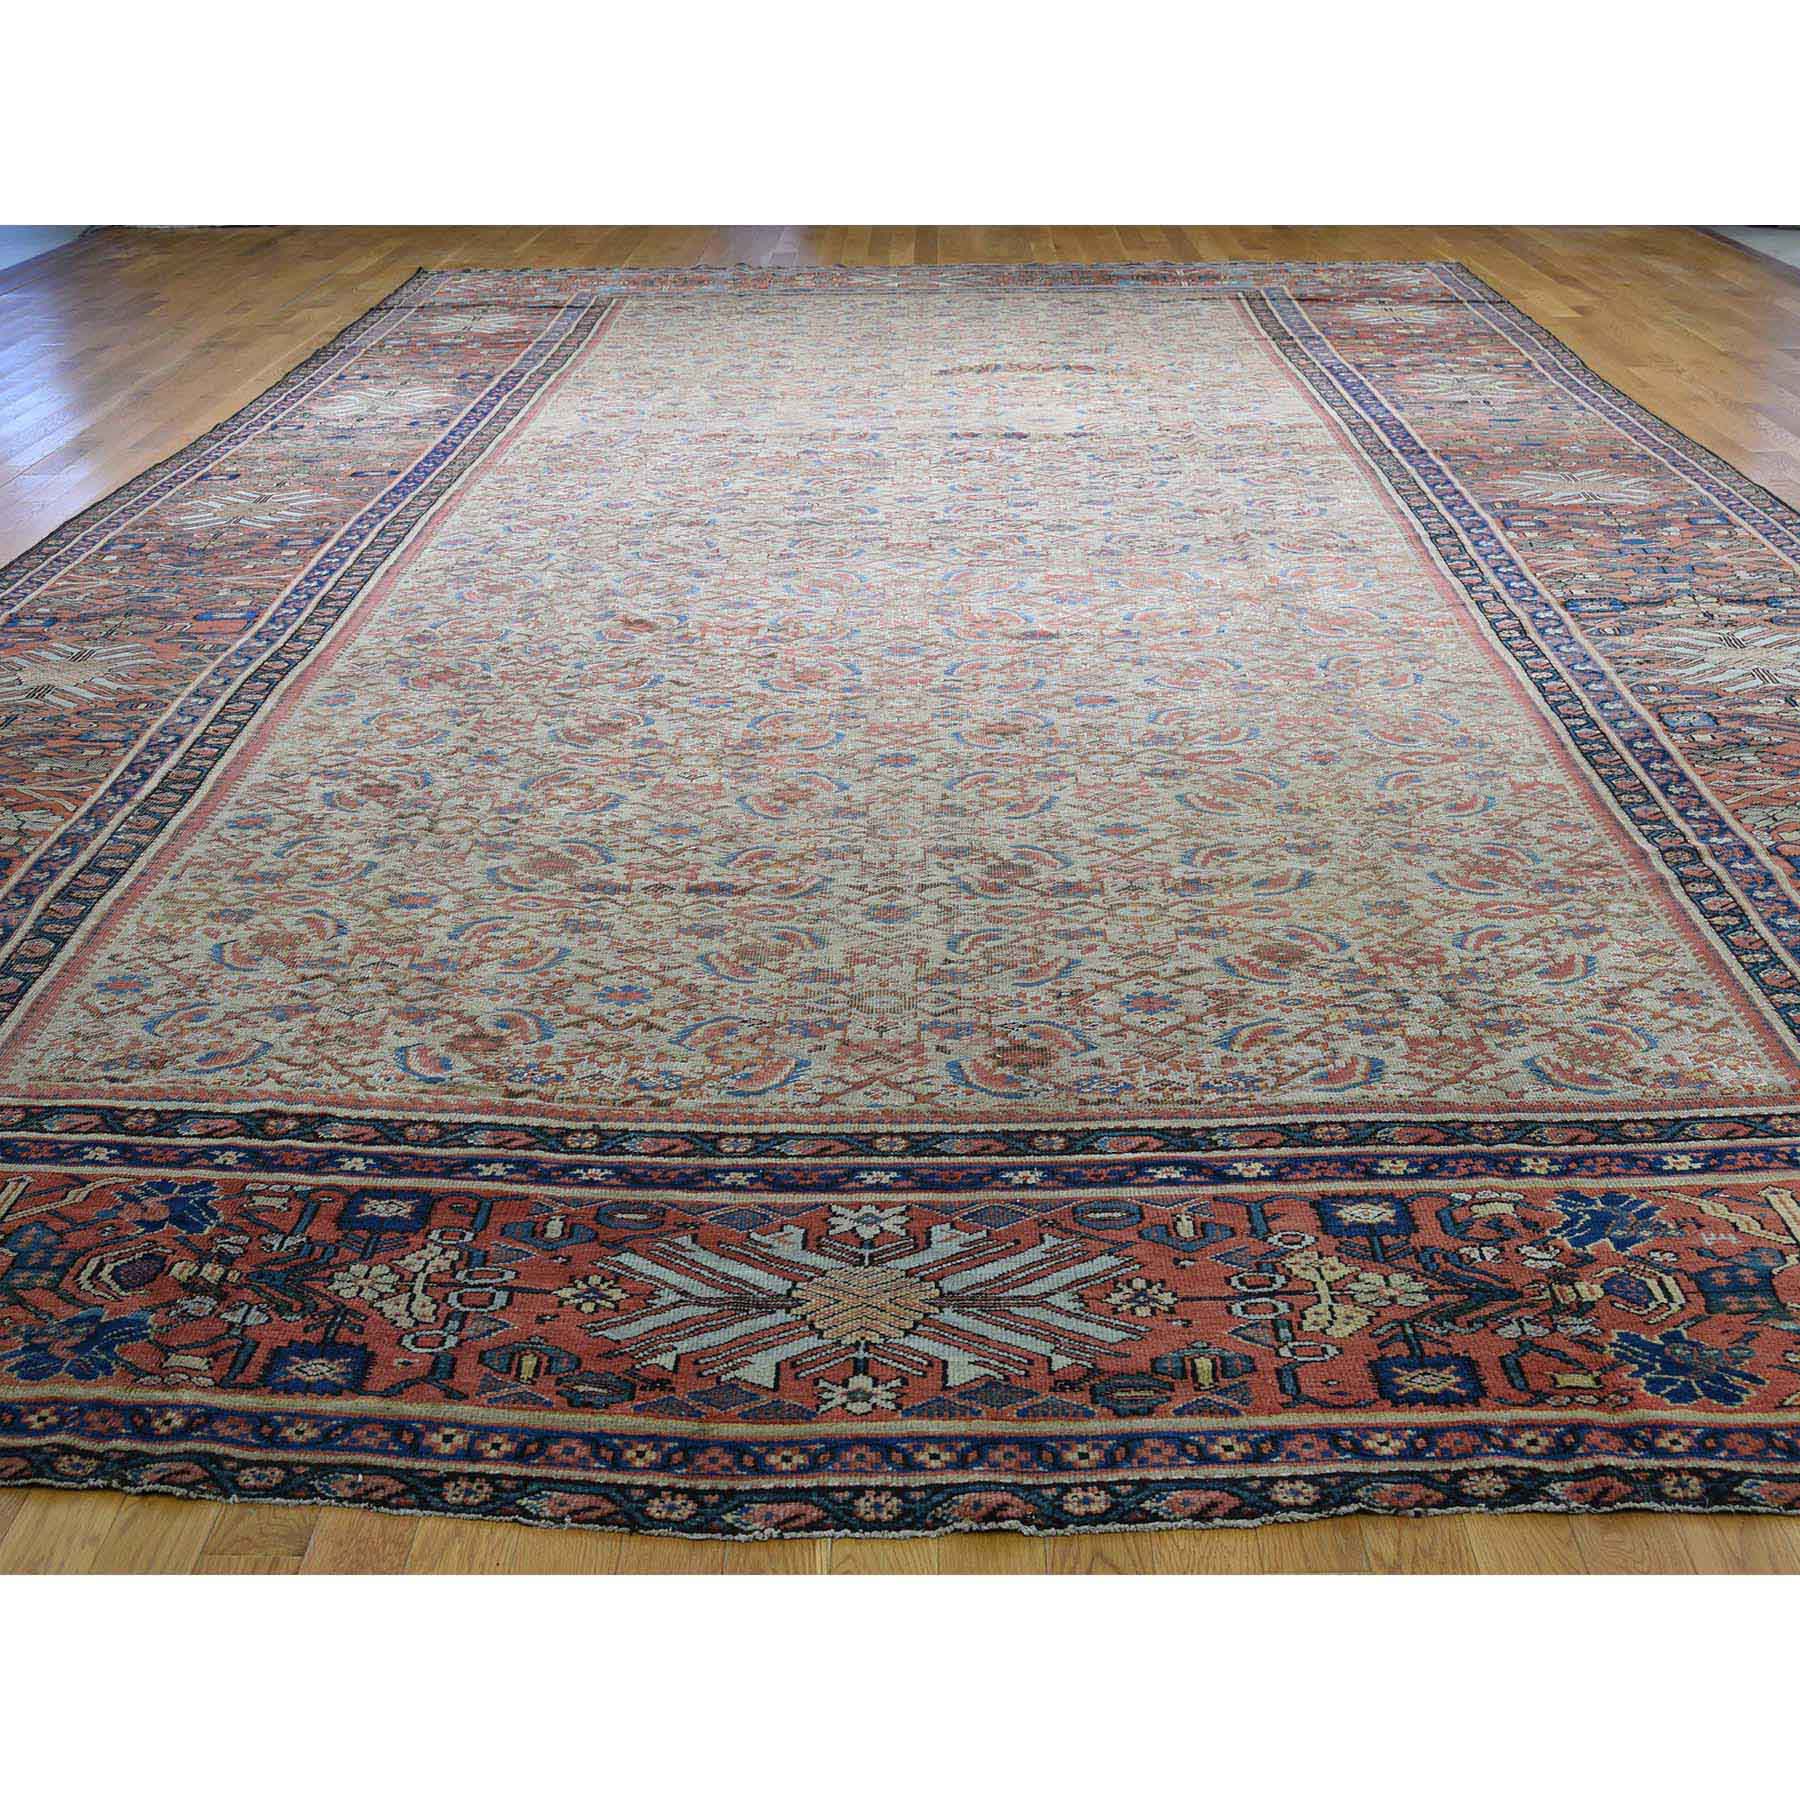 12'x18'3" Antique Persian Mahal Exc Cond Pure Wool Hand Woven Oversized Rug 